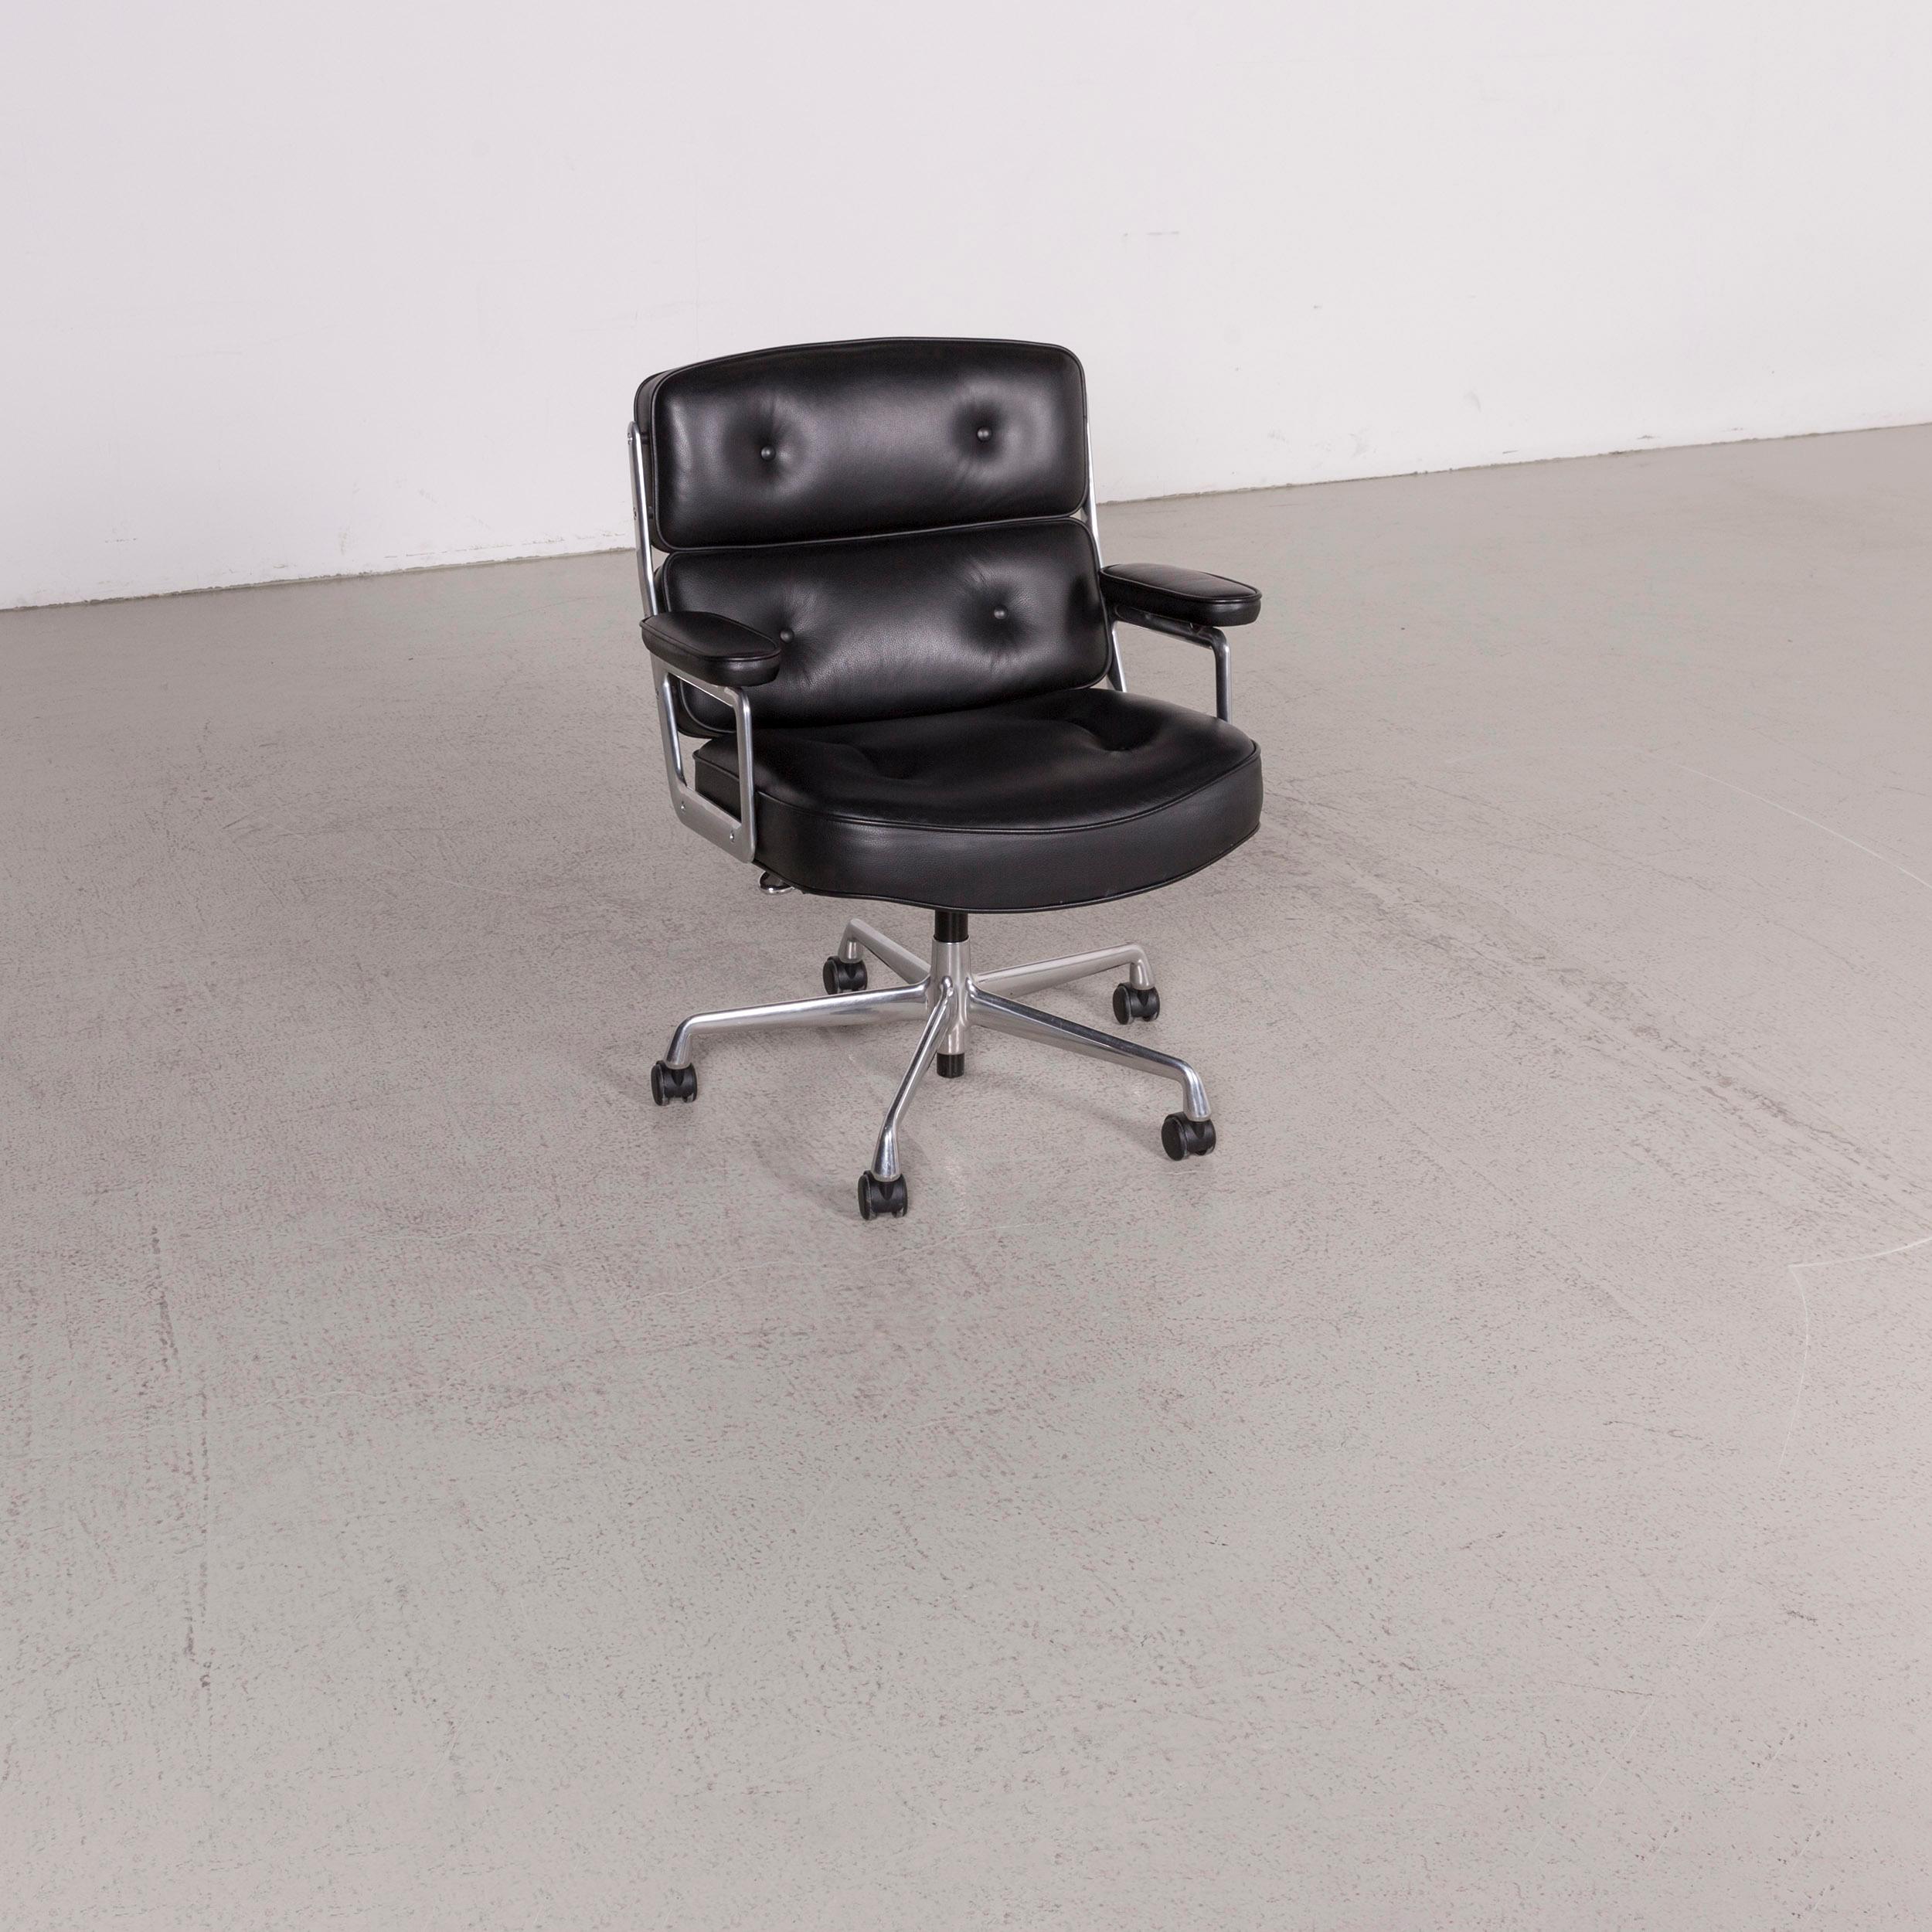 We bring to you a Vitra ES 104 lobby chair designer leather armchair black genuine leather.

Product measurements in centimeters:

Depth 65
Width 70
Height 88
Seat-height 50
Rest-height 62
Seat-depth 45
Seat-width 58
Back-height 48.
  